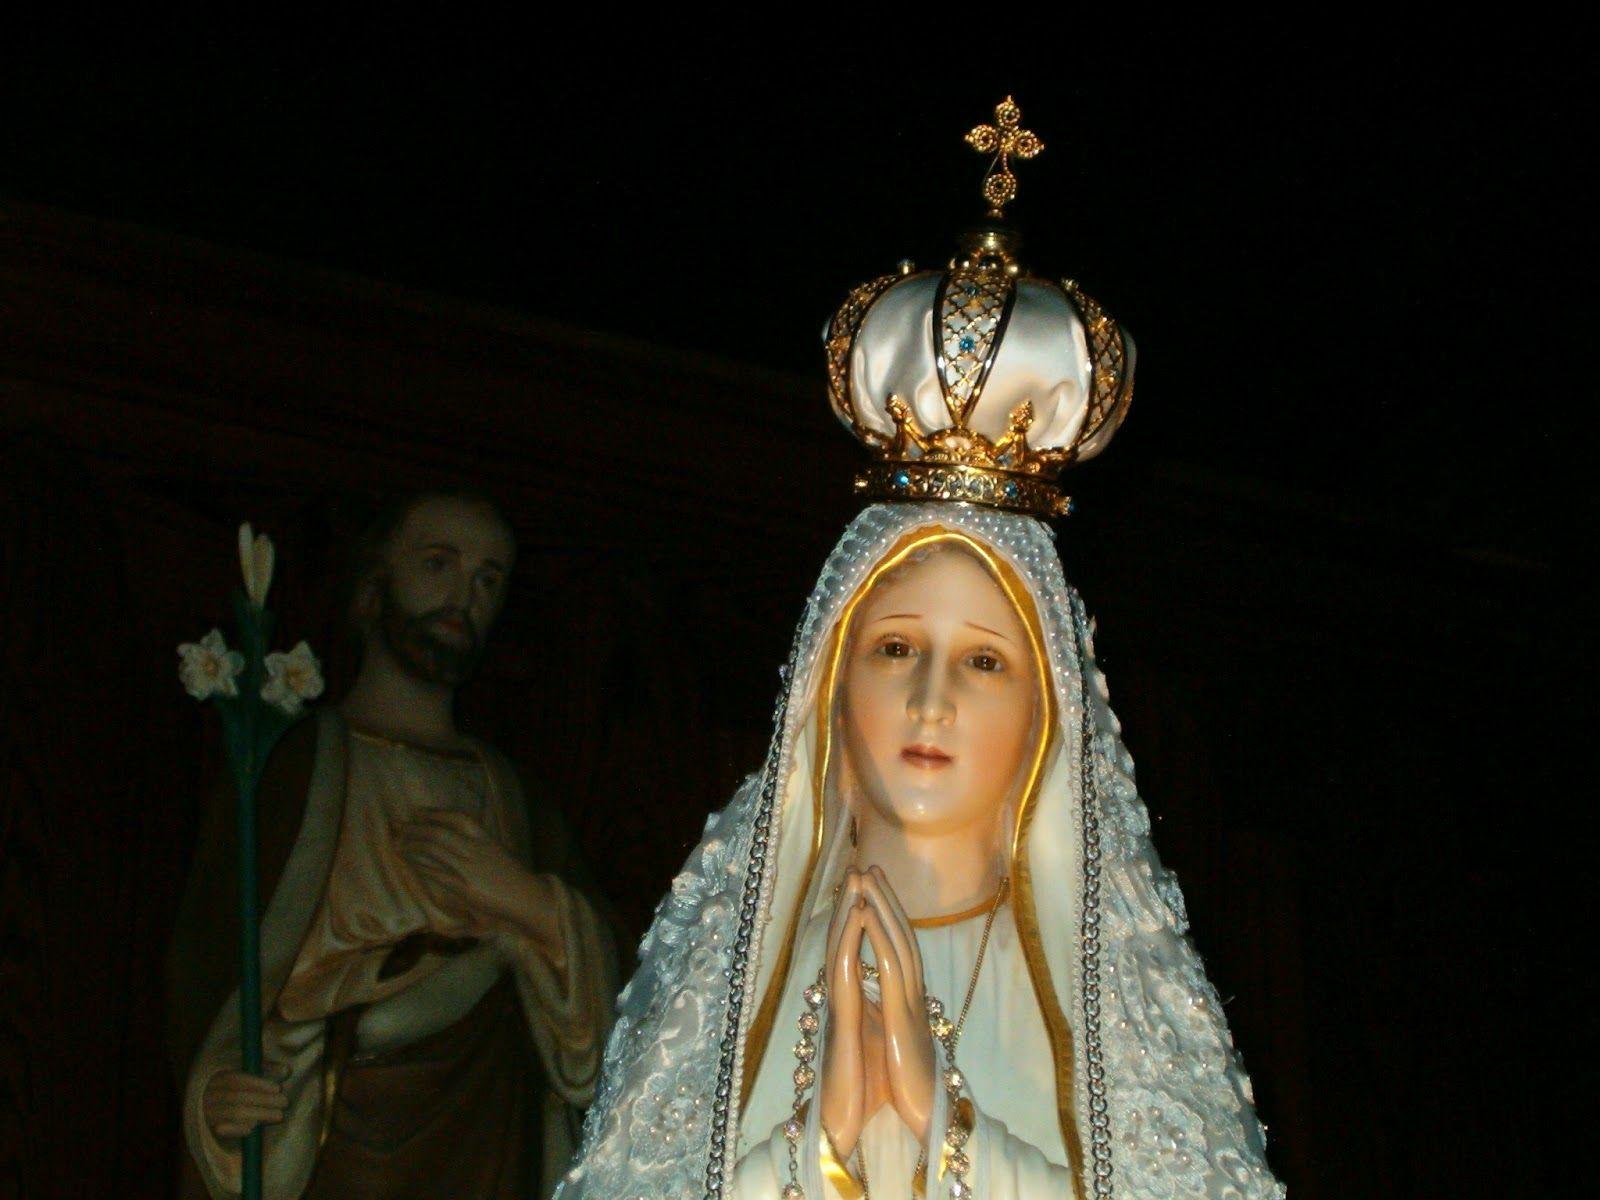 St. Robert Bellarmine's Blog: The True Story of the Our Lady